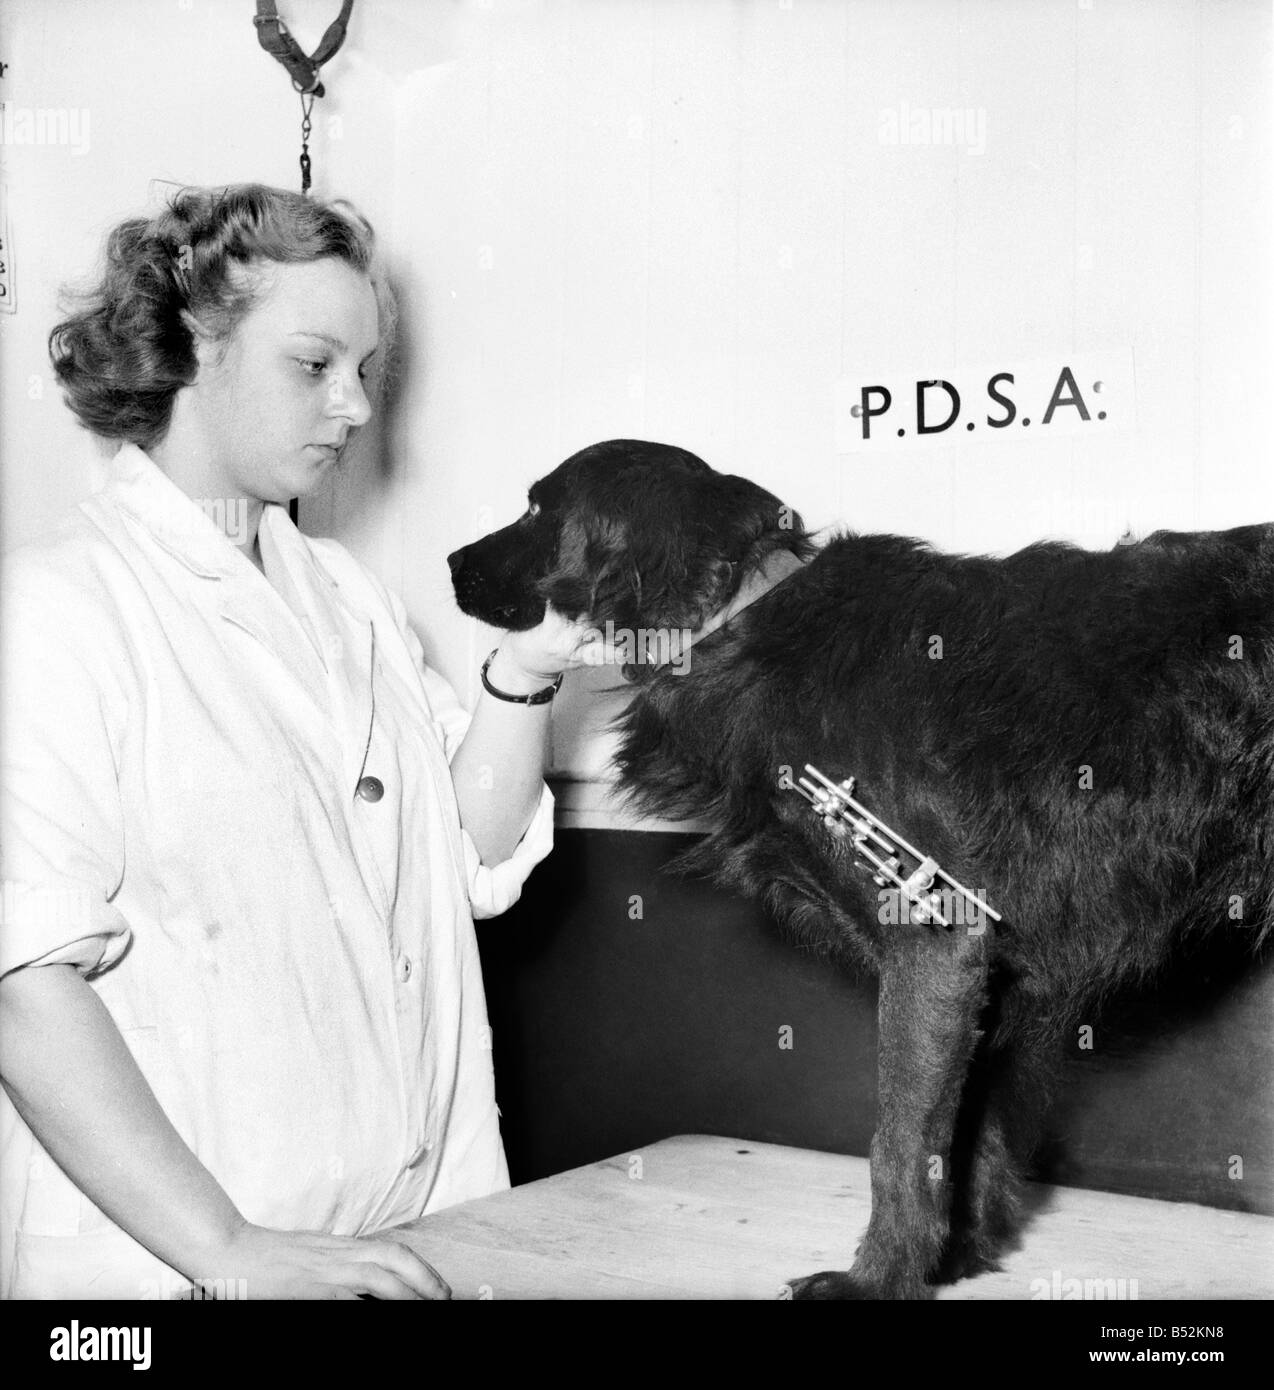 Vet attends to a dog with a broken leg at the P. D. S. A. Centre, Woodford, Essex. August 1952 C4044-001 Stock Photo